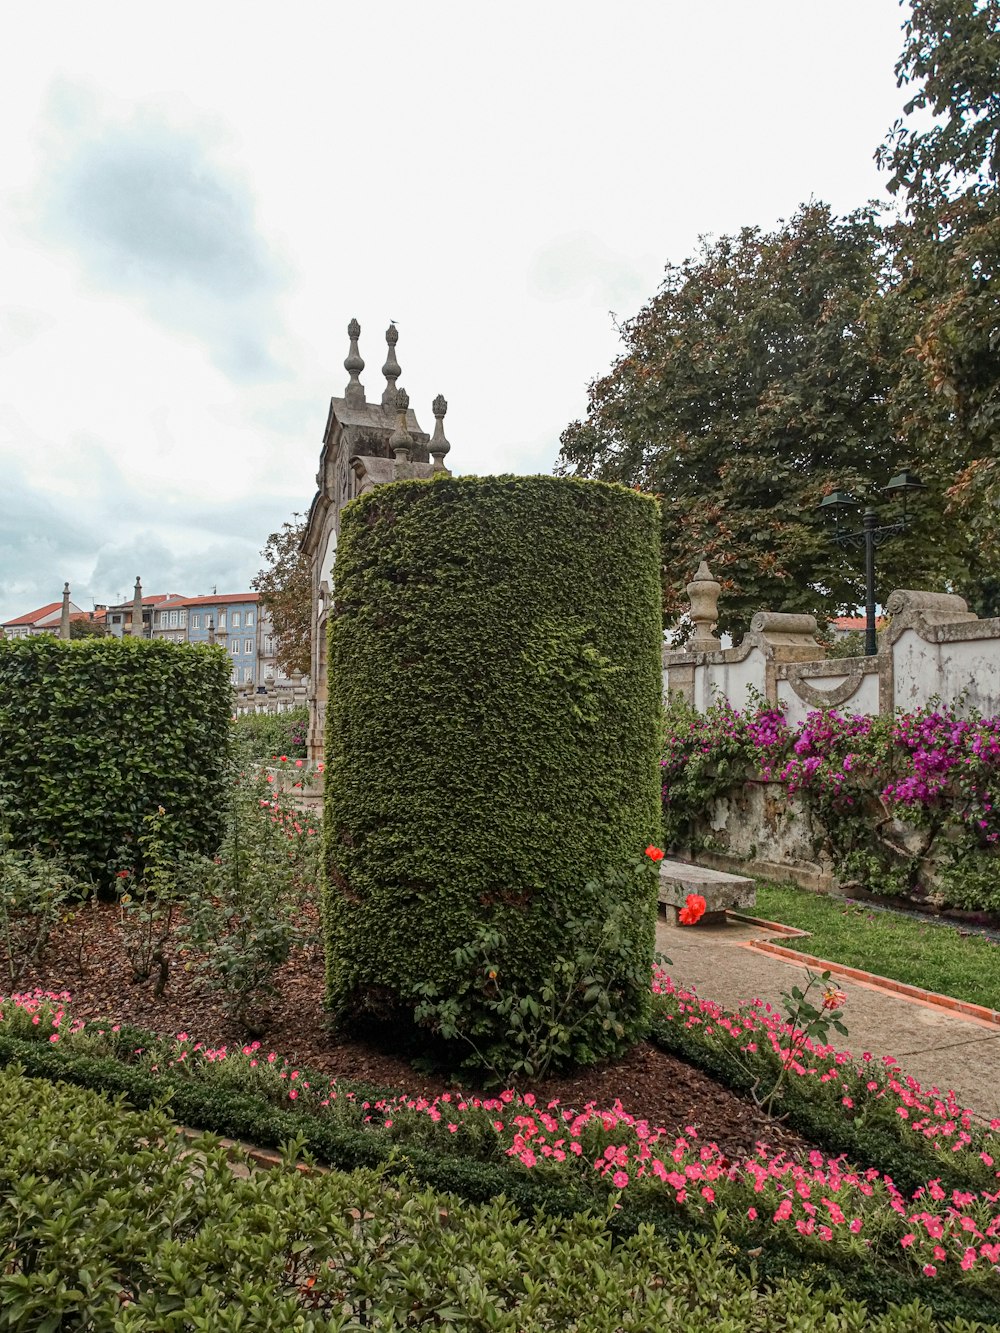 a garden with flowers and a statue in the middle of it